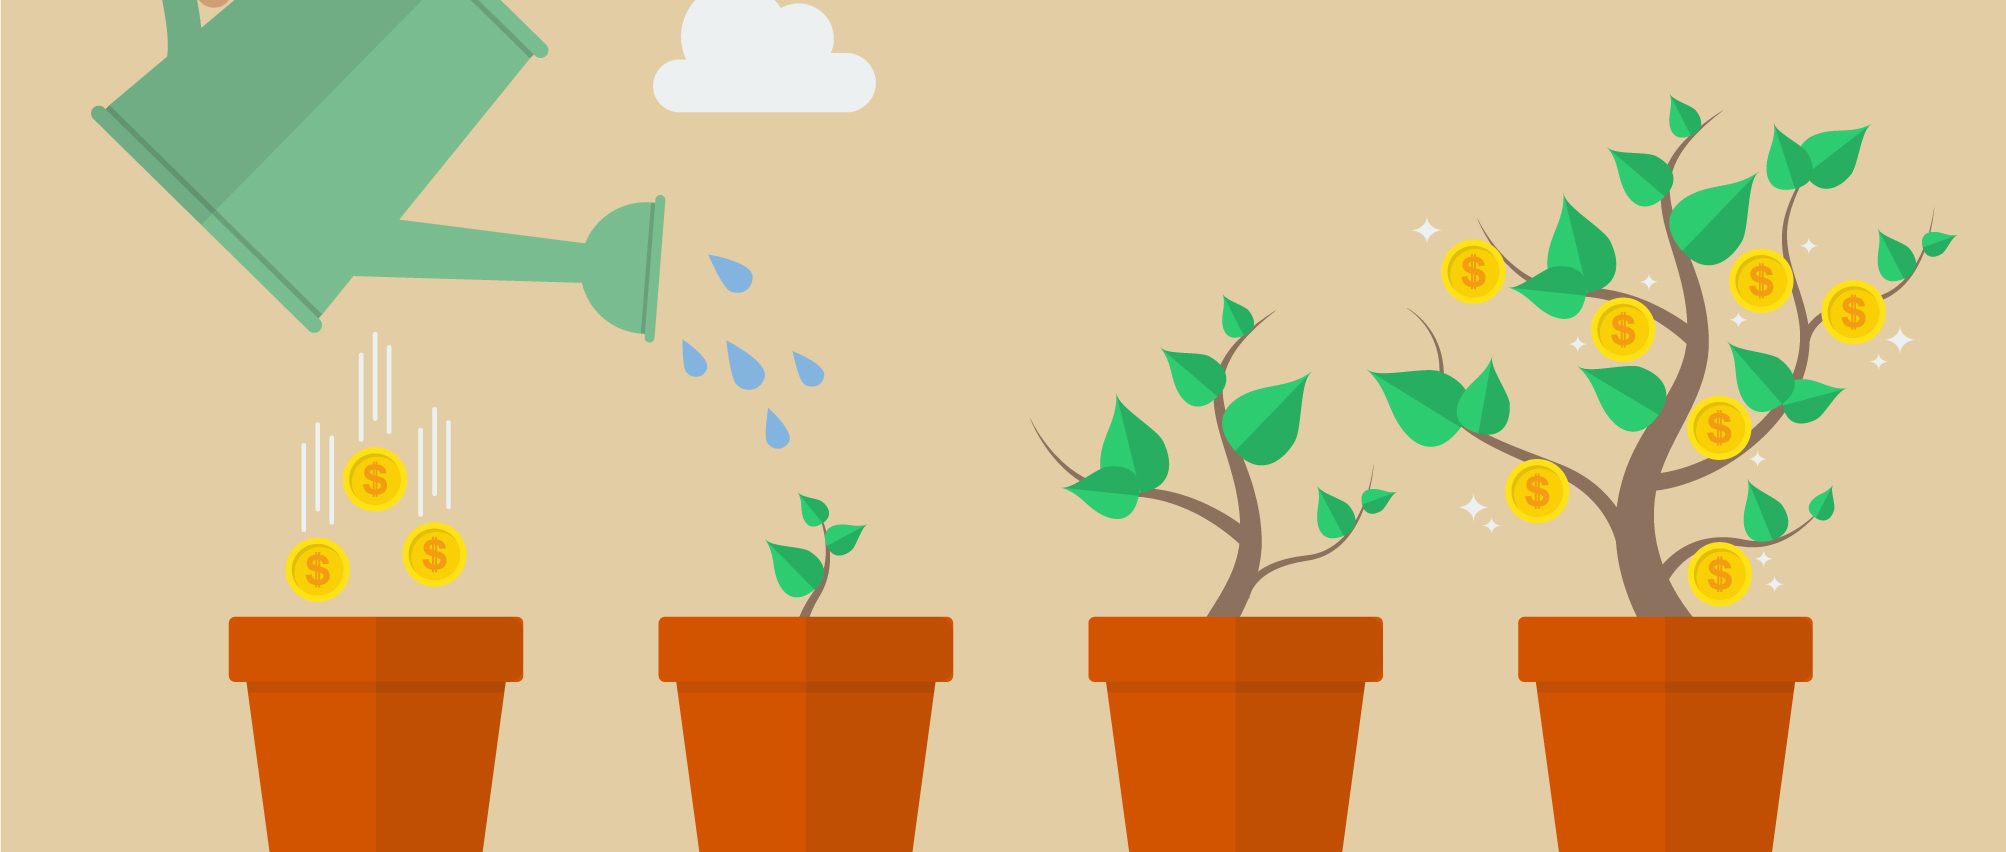 An illustration showing four pots. First pot showing three gold coins with dollar signs on them, second pot being watered with a watering can and a small plant growing, third pot showing the plant growing larger, and a fourth pot with a larger plant showing seven gold coins with dollar sings on them.